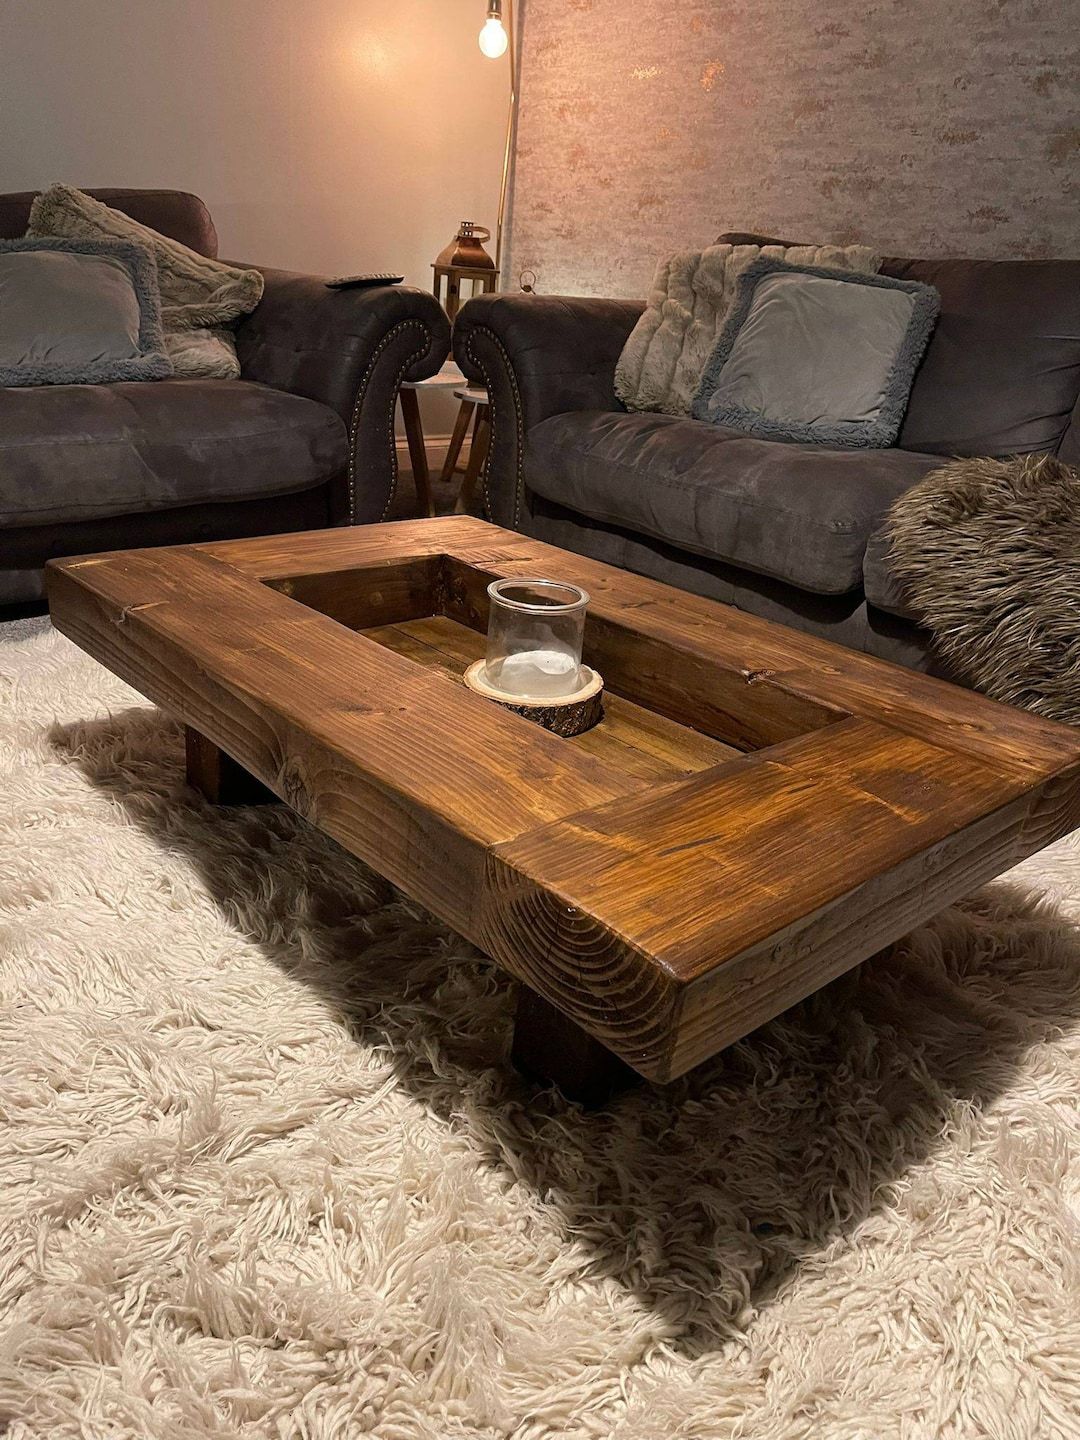 Rustic Handmade Solid Wood Sleeper Coffee Table Xtra Large Xtra Wide  Version – Etsy Inside Brown Rustic Coffee Tables (View 5 of 15)